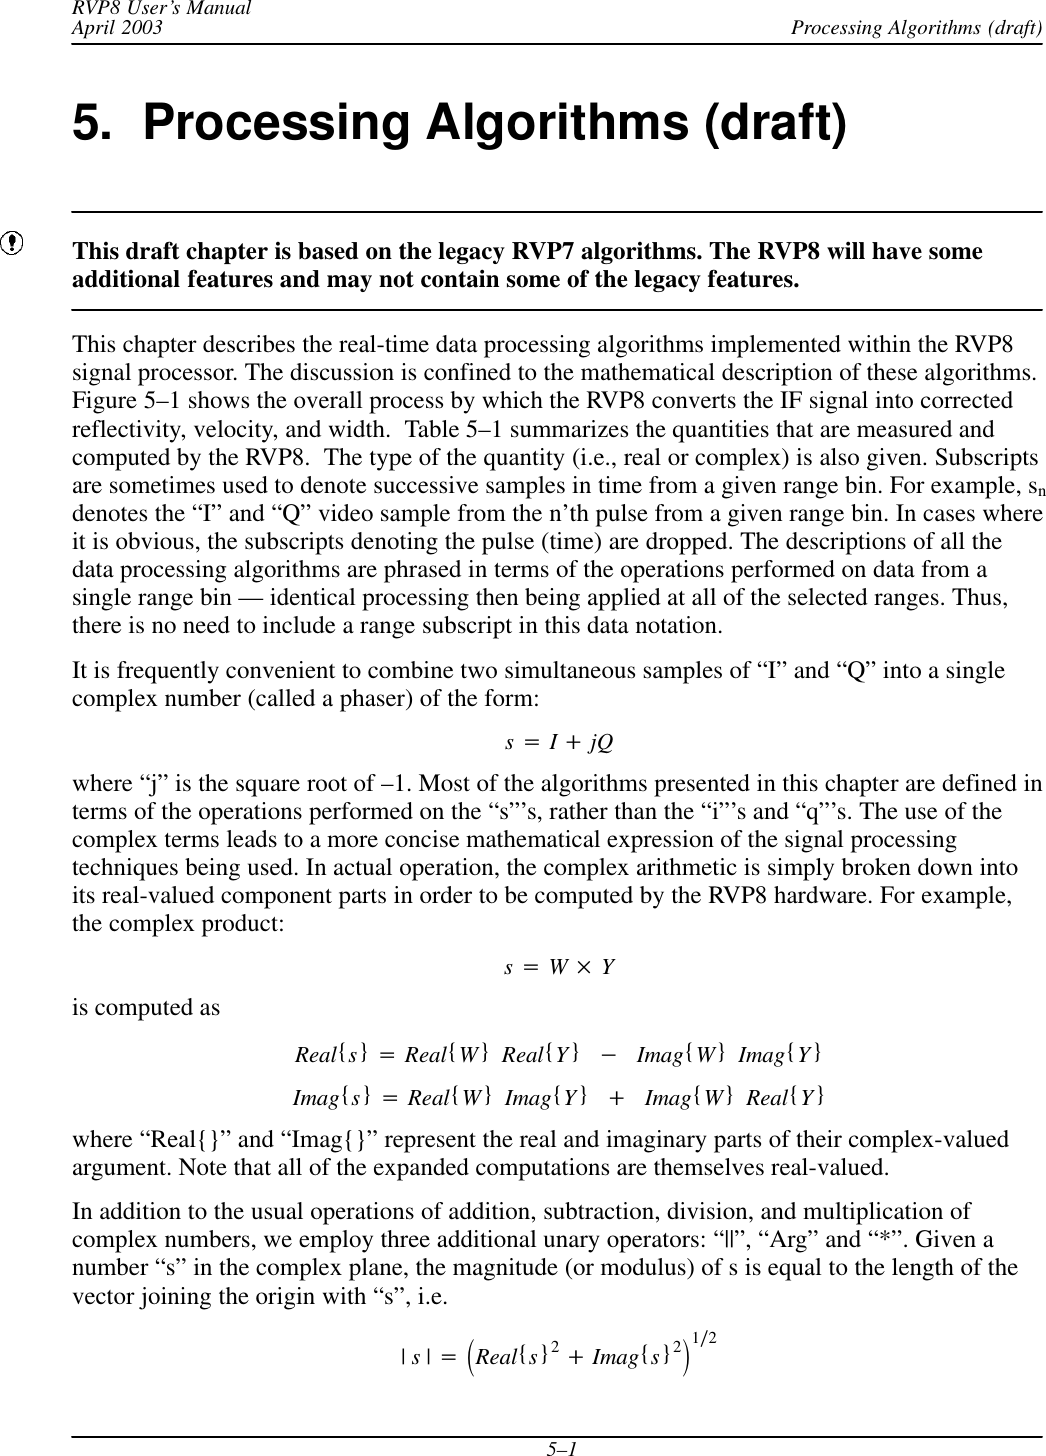 Processing Algorithms (draft)RVP8 User’s ManualApril 20035–15.  Processing Algorithms (draft)This draft chapter is based on the legacy RVP7 algorithms. The RVP8 will have someadditional features and may not contain some of the legacy features.This chapter describes the real-time data processing algorithms implemented within the RVP8signal processor. The discussion is confined to the mathematical description of these algorithms.Figure 5–1 shows the overall process by which the RVP8 converts the IF signal into correctedreflectivity, velocity, and width.  Table 5–1 summarizes the quantities that are measured andcomputed by the RVP8.  The type of the quantity (i.e., real or complex) is also given. Subscriptsare sometimes used to denote successive samples in time from a given range bin. For example, sndenotes the “I” and “Q” video sample from the n’th pulse from a given range bin. In cases whereit is obvious, the subscripts denoting the pulse (time) are dropped. The descriptions of all thedata processing algorithms are phrased in terms of the operations performed on data from asingle range bin — identical processing then being applied at all of the selected ranges. Thus,there is no need to include a range subscript in this data notation.It is frequently convenient to combine two simultaneous samples of “I” and “Q” into a singlecomplex number (called a phaser) of the form:s+I)jQwhere “j” is the square root of –1. Most of the algorithms presented in this chapter are defined interms of the operations performed on the “s”’s, rather than the “i”’s and “q”’s. The use of thecomplex terms leads to a more concise mathematical expression of the signal processingtechniques being used. In actual operation, the complex arithmetic is simply broken down intoits real-valued component parts in order to be computed by the RVP8 hardware. For example,the complex product:s+W Yis computed asReal{s}+Real{W}Real{Y}*Imag{W}Imag{Y}Imag{s}+Real{W}Imag{Y})Imag{W}Real{Y}where “Real{}” and “Imag{}” represent the real and imaginary parts of their complex-valuedargument. Note that all of the expanded computations are themselves real-valued.In addition to the usual operations of addition, subtraction, division, and multiplication ofcomplex numbers, we employ three additional unary operators: “||”, “Arg” and “*”. Given anumber “s” in the complex plane, the magnitude (or modulus) of s is equal to the length of thevector joining the origin with “s”, i.e.|s|+ǒReal{s}2)Imag{s}2Ǔ1ń2